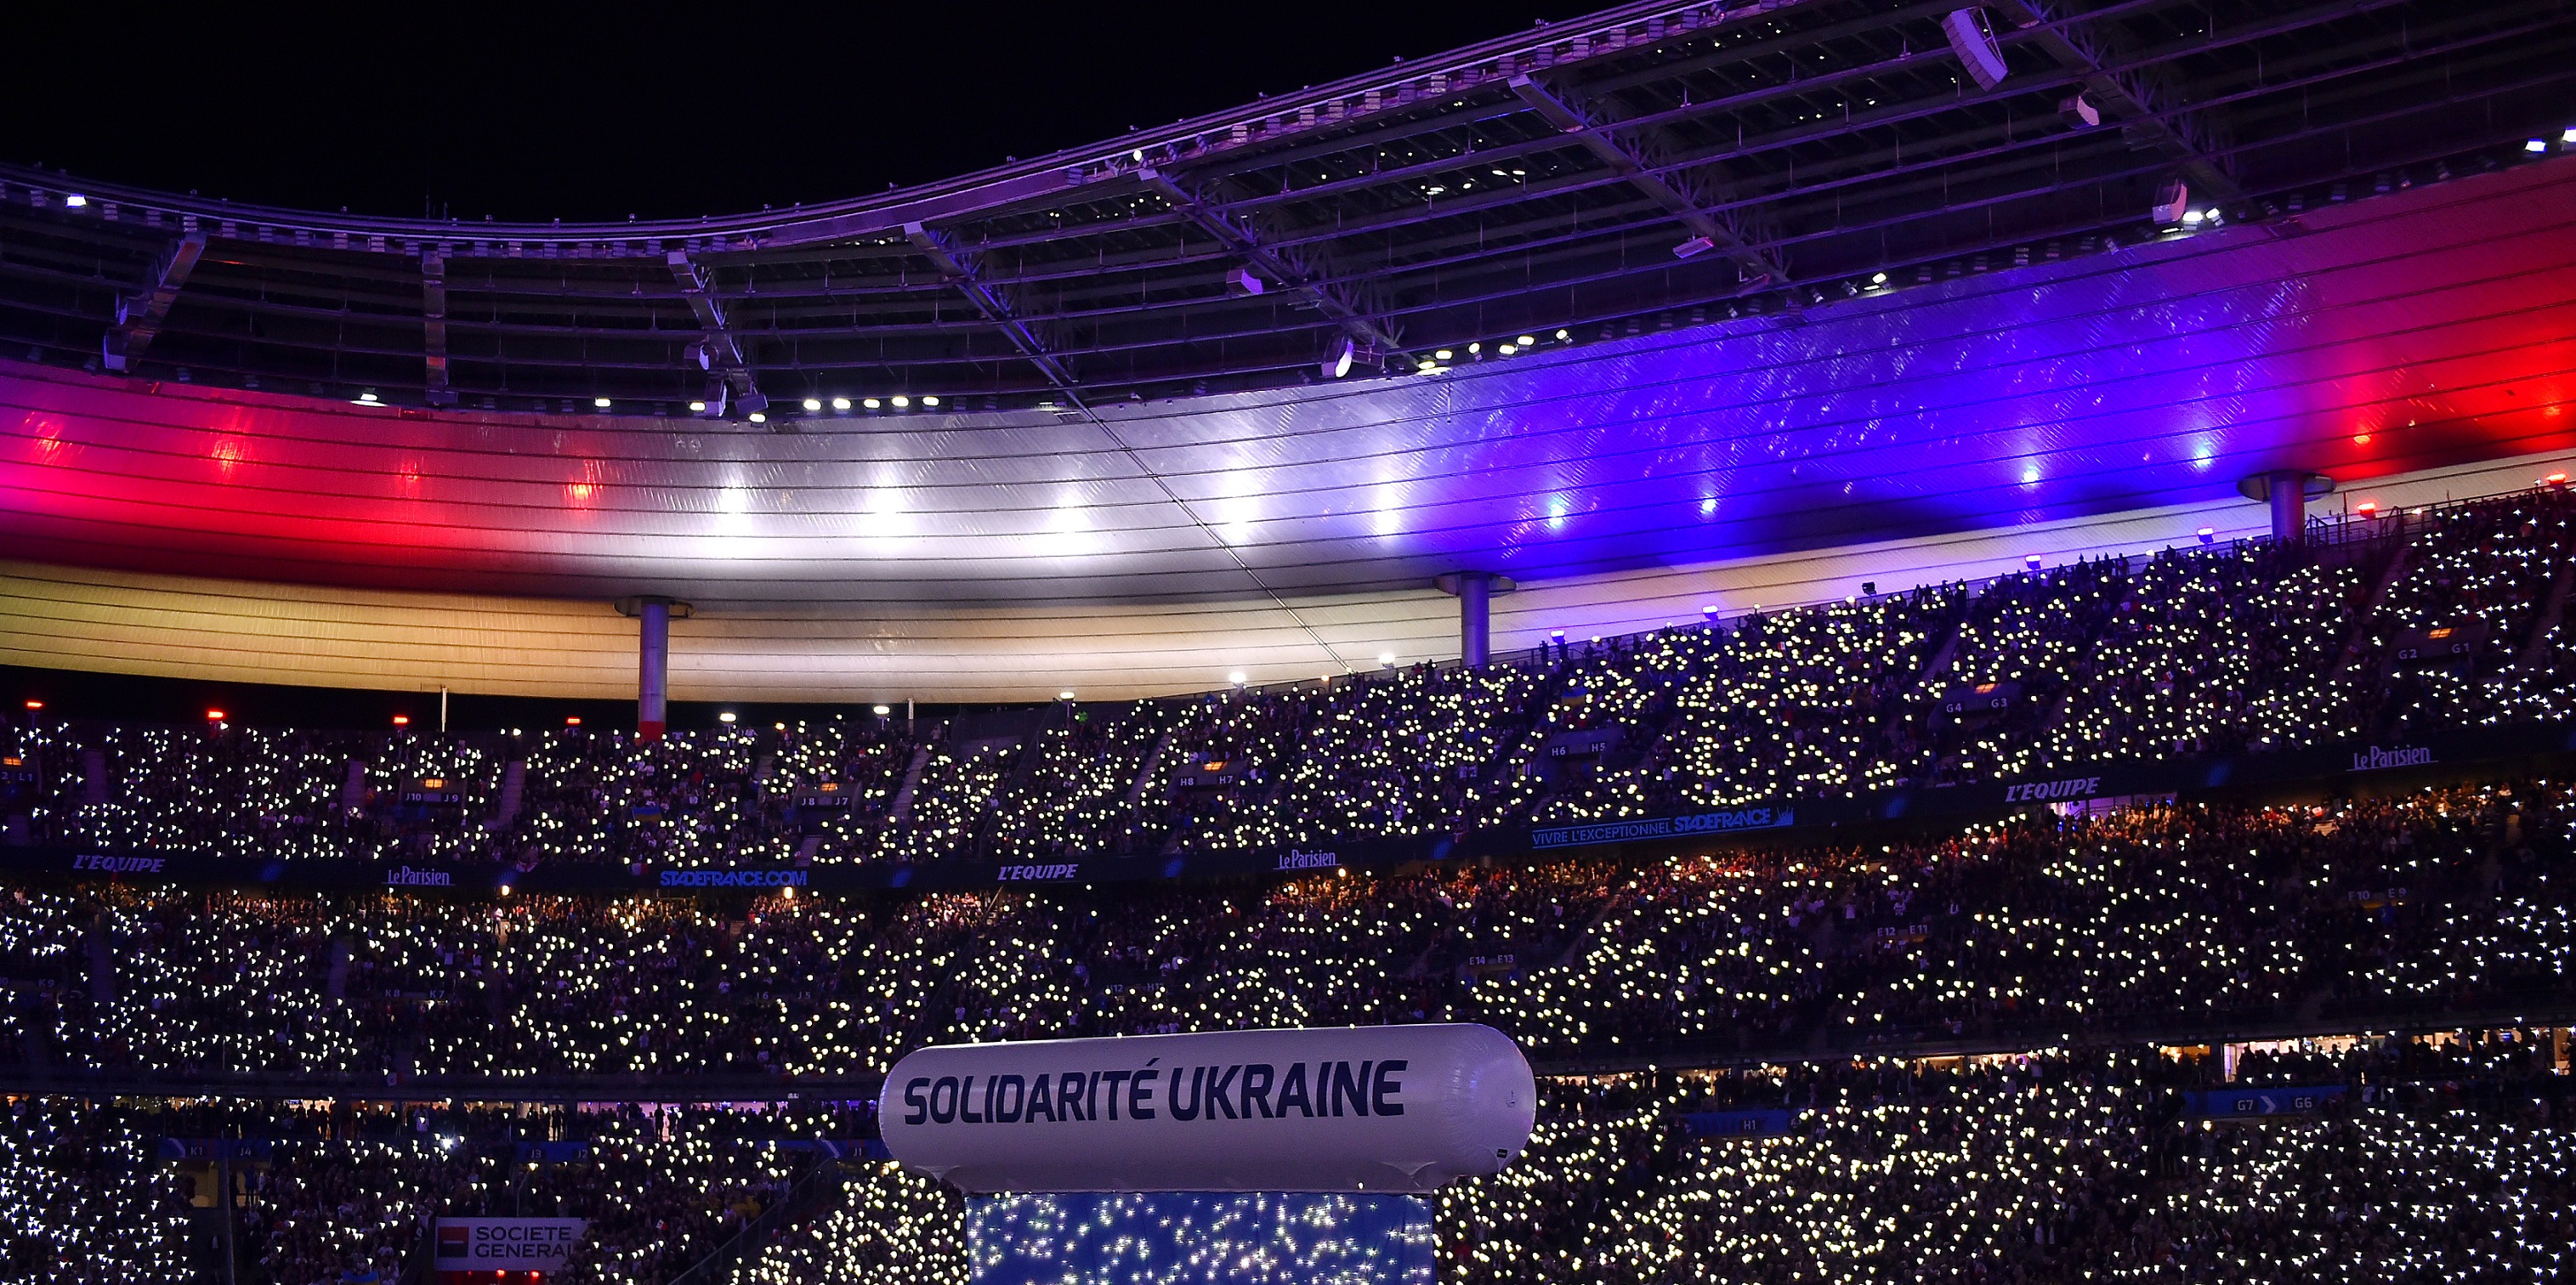 UEFA Champions League finalist to get 20,000 of 75,000 tickets available at Paris’ Stade de France